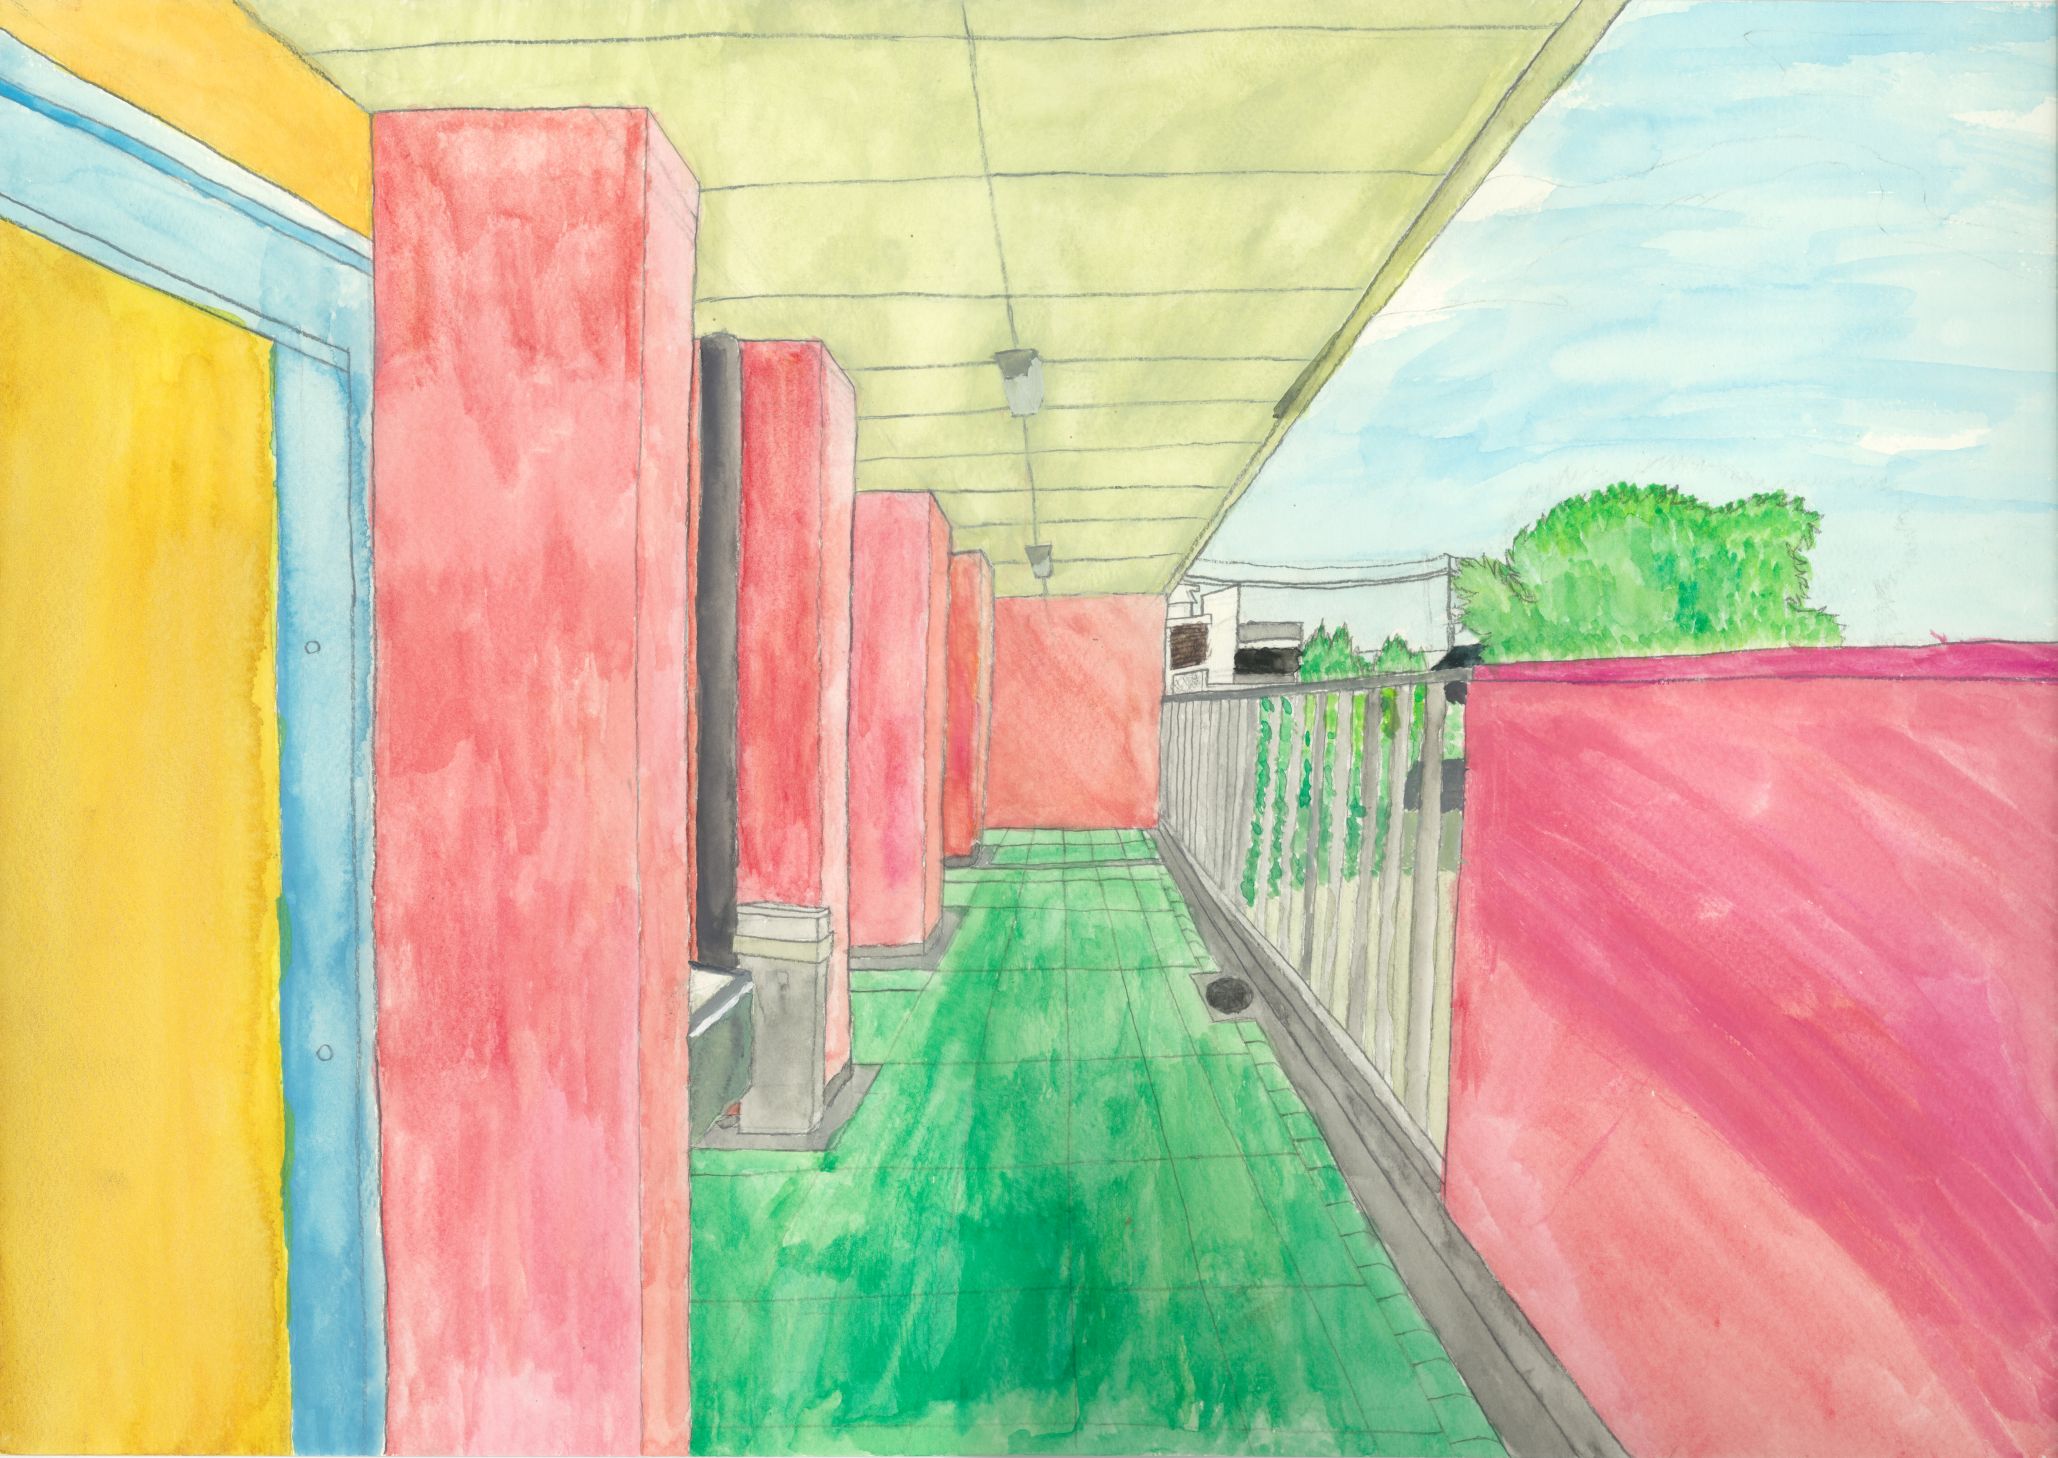 Student artwork – Landscape painting using perspective projection